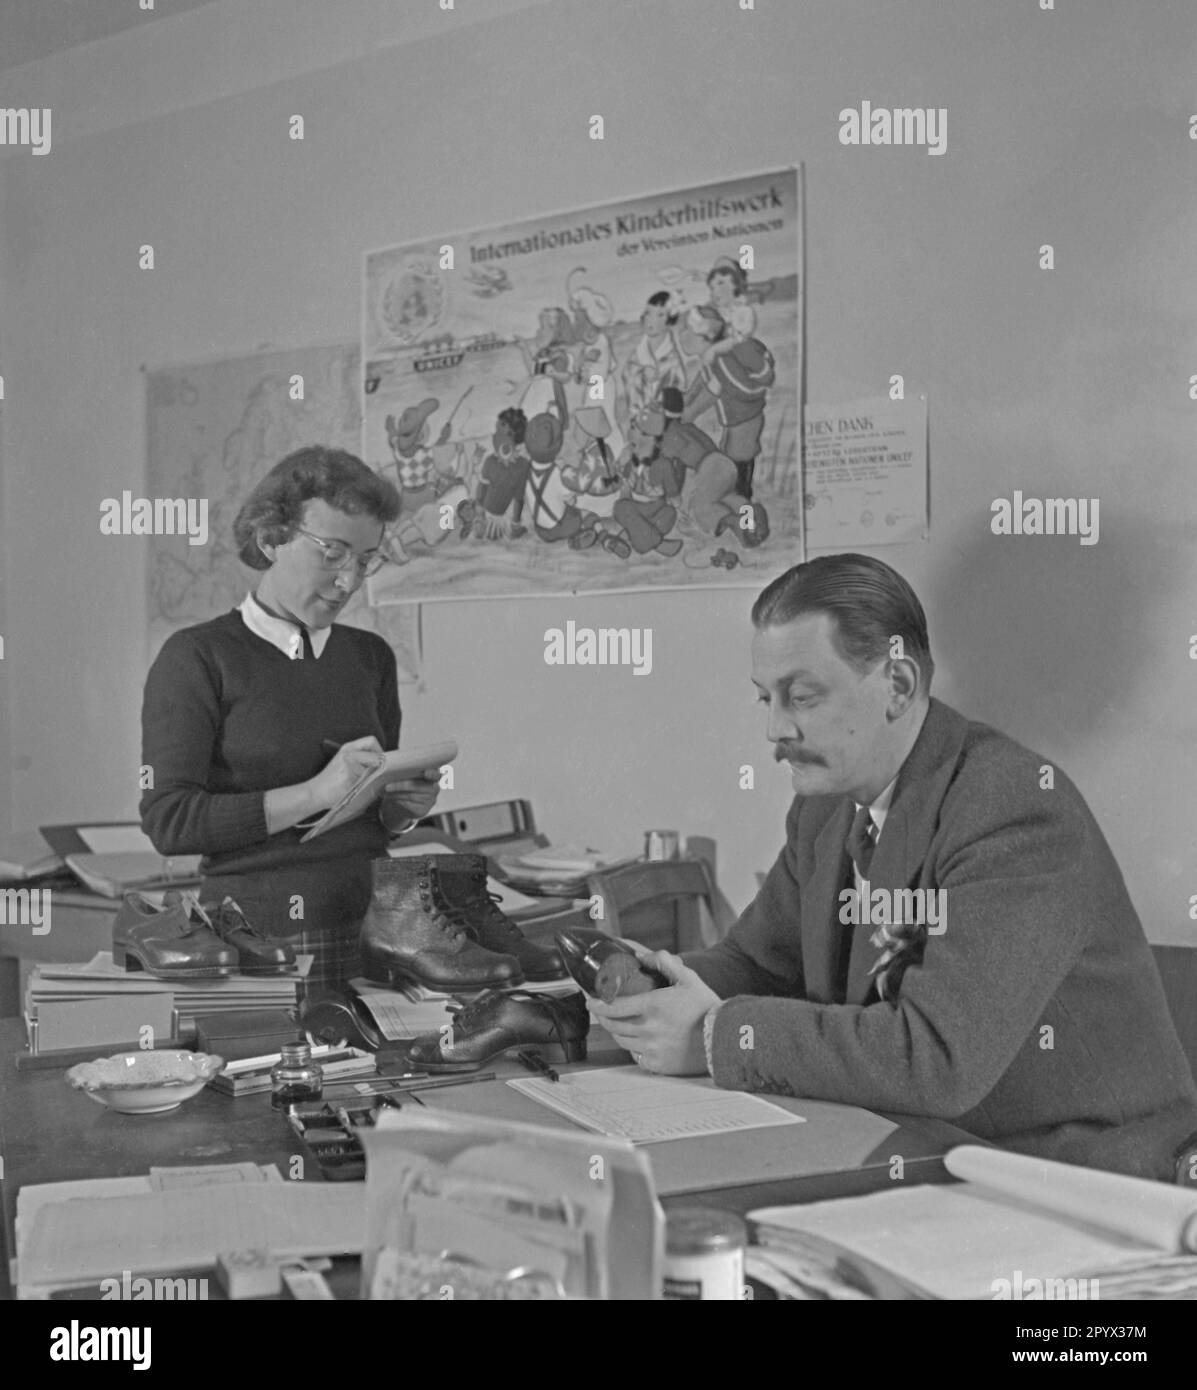 At an office United Nations Children's Fund, an employee inspects shoes made by seamstresses. On the left a secretary. On the wall hangs a poster of UNICEF. Stock Photo